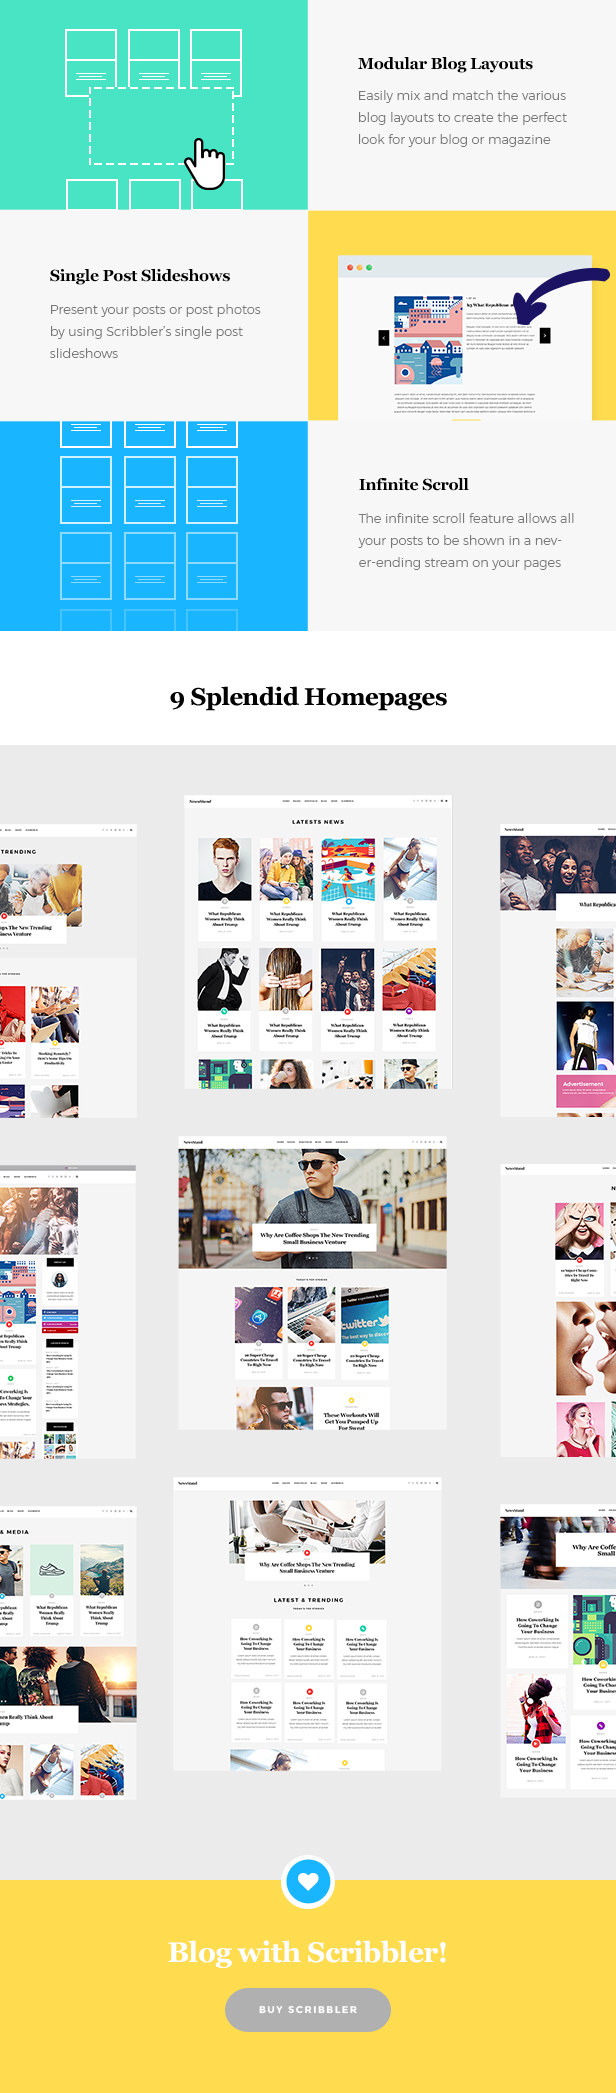 WordPress theme Scribbler - A Simple Theme for Blogs and Magazines (Blog / Magazine)